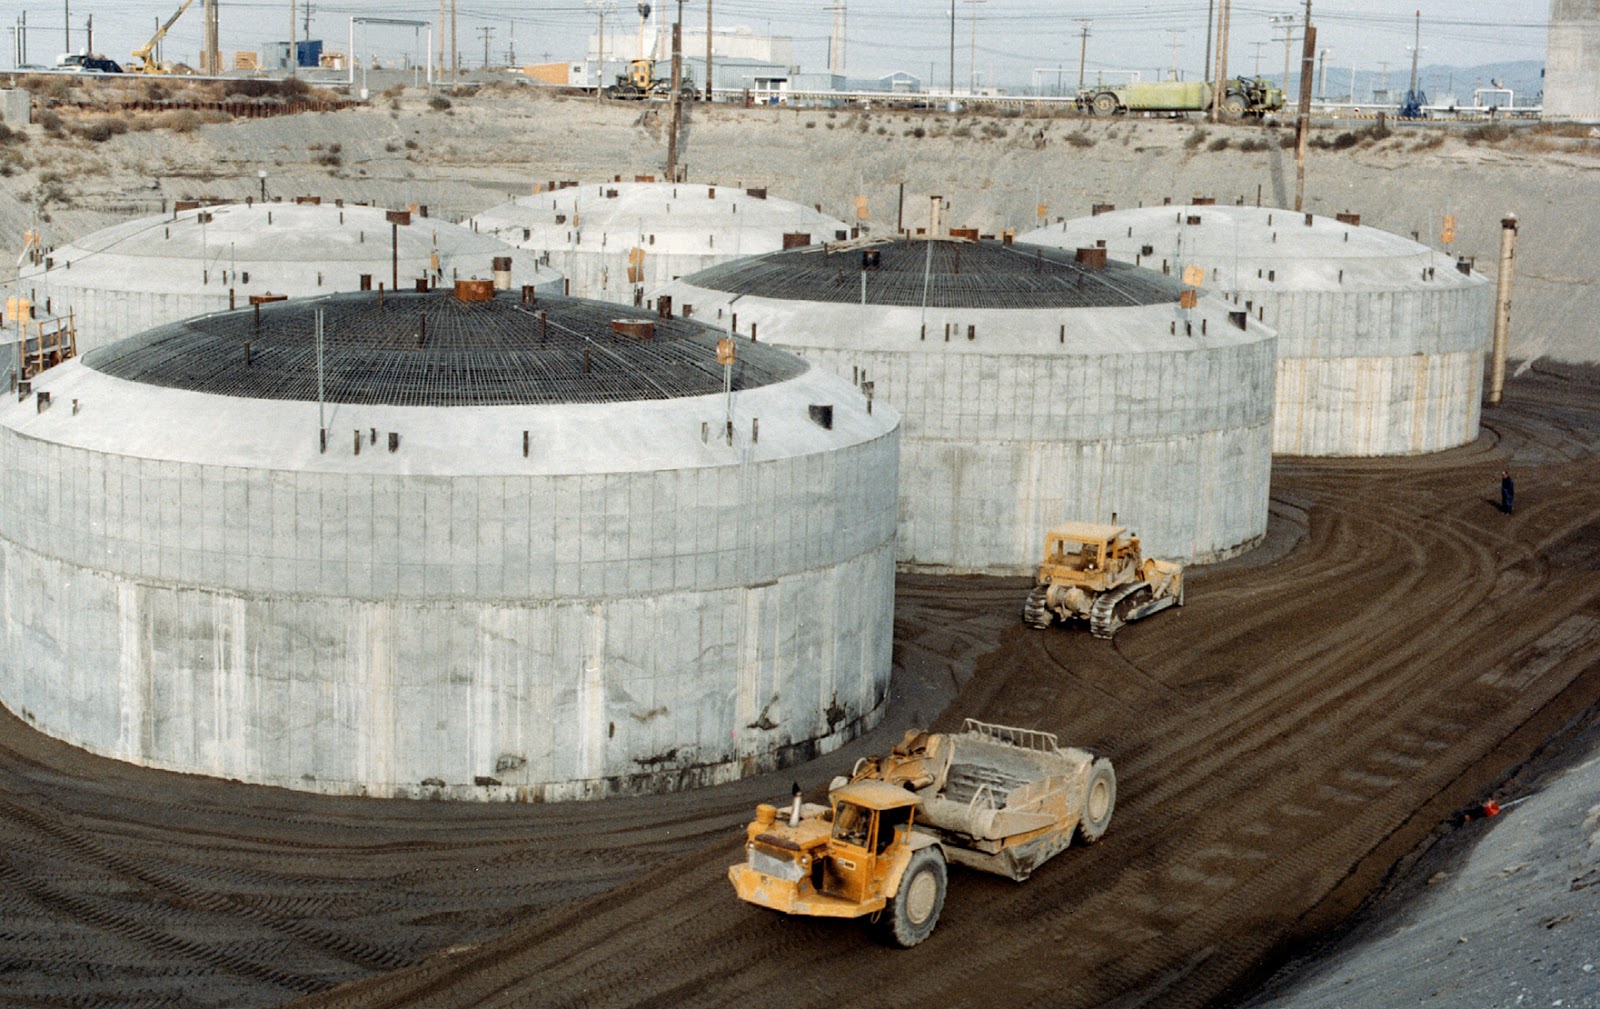 US Energy Department delays decommissioning process at Hanford nuclear waste site for 17 years